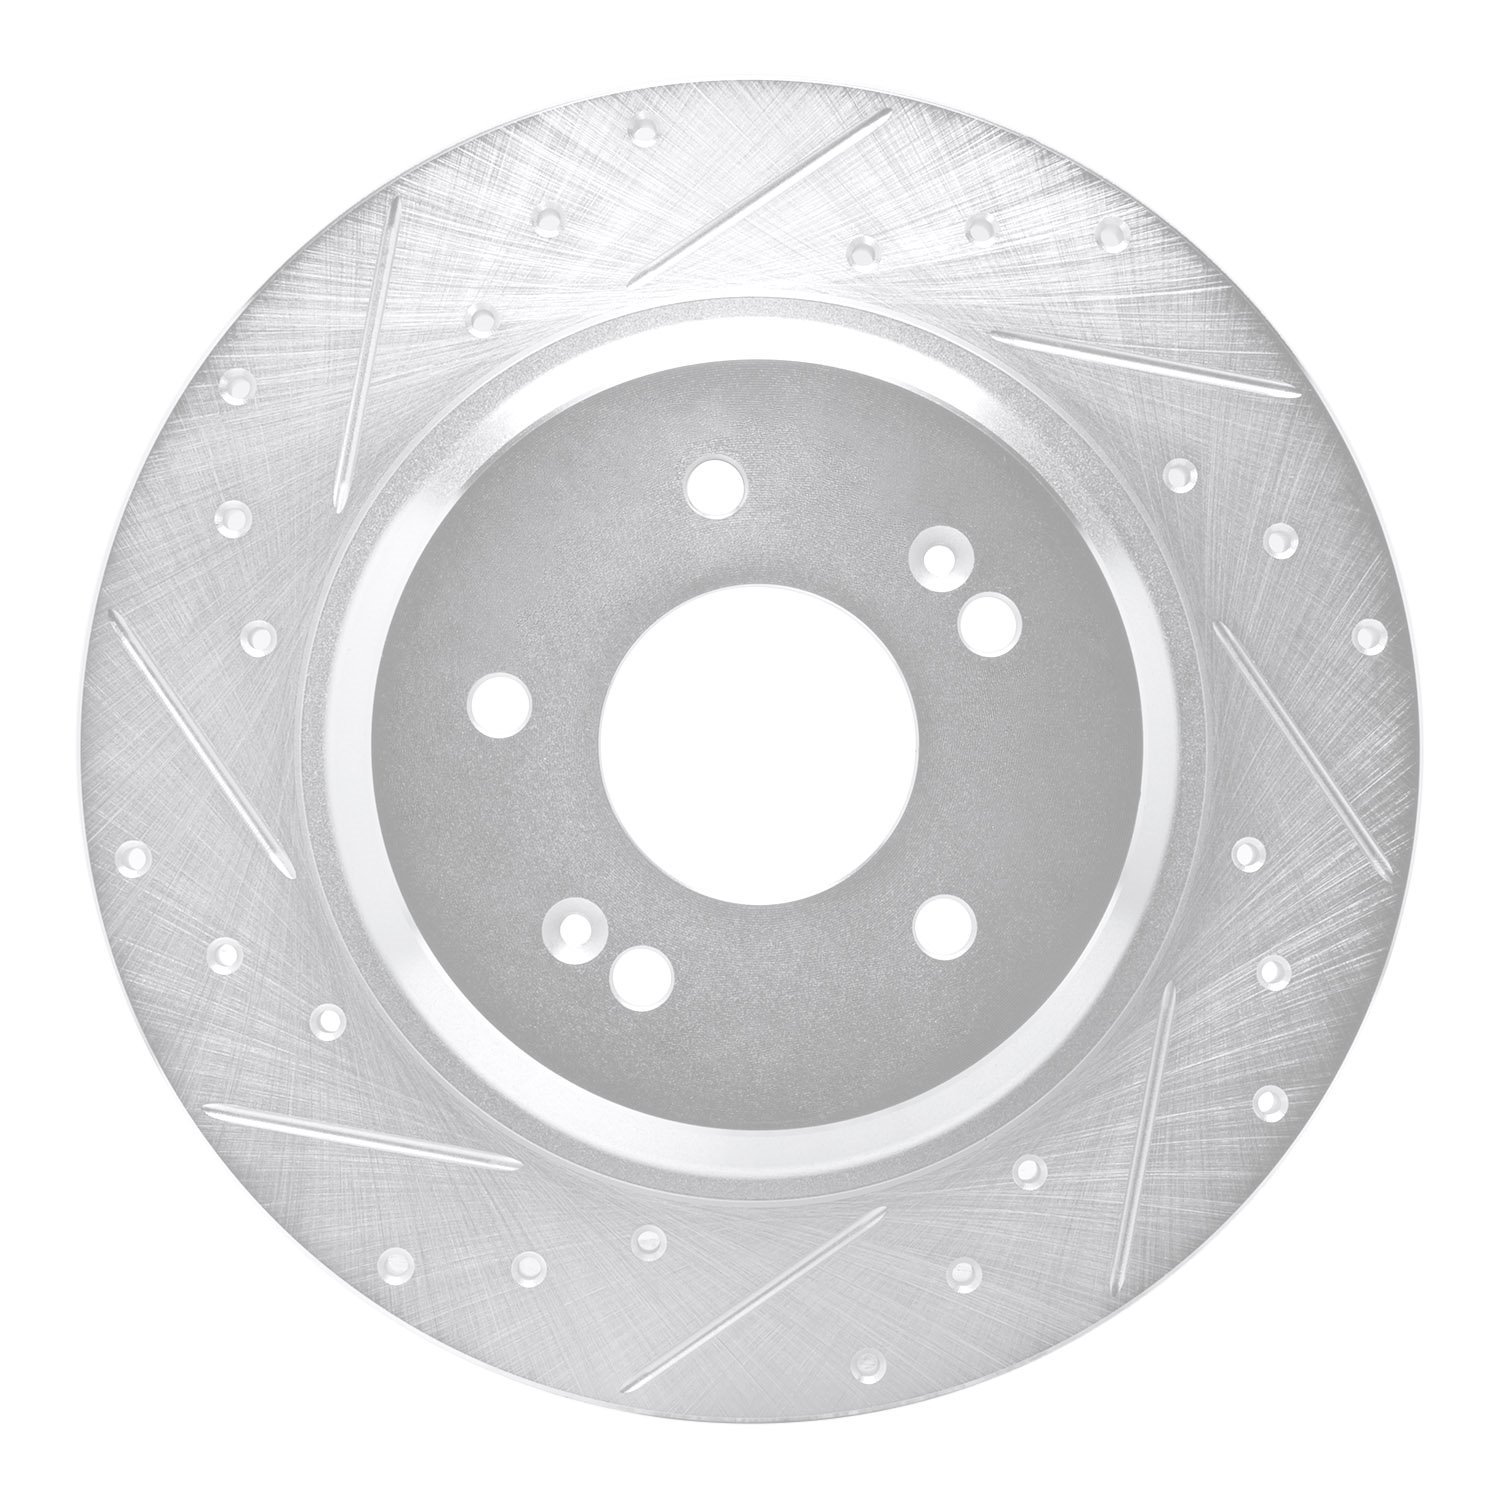 631-21047L Drilled/Slotted Brake Rotor [Silver], Fits Select Kia/Hyundai/Genesis, Position: Rear Left